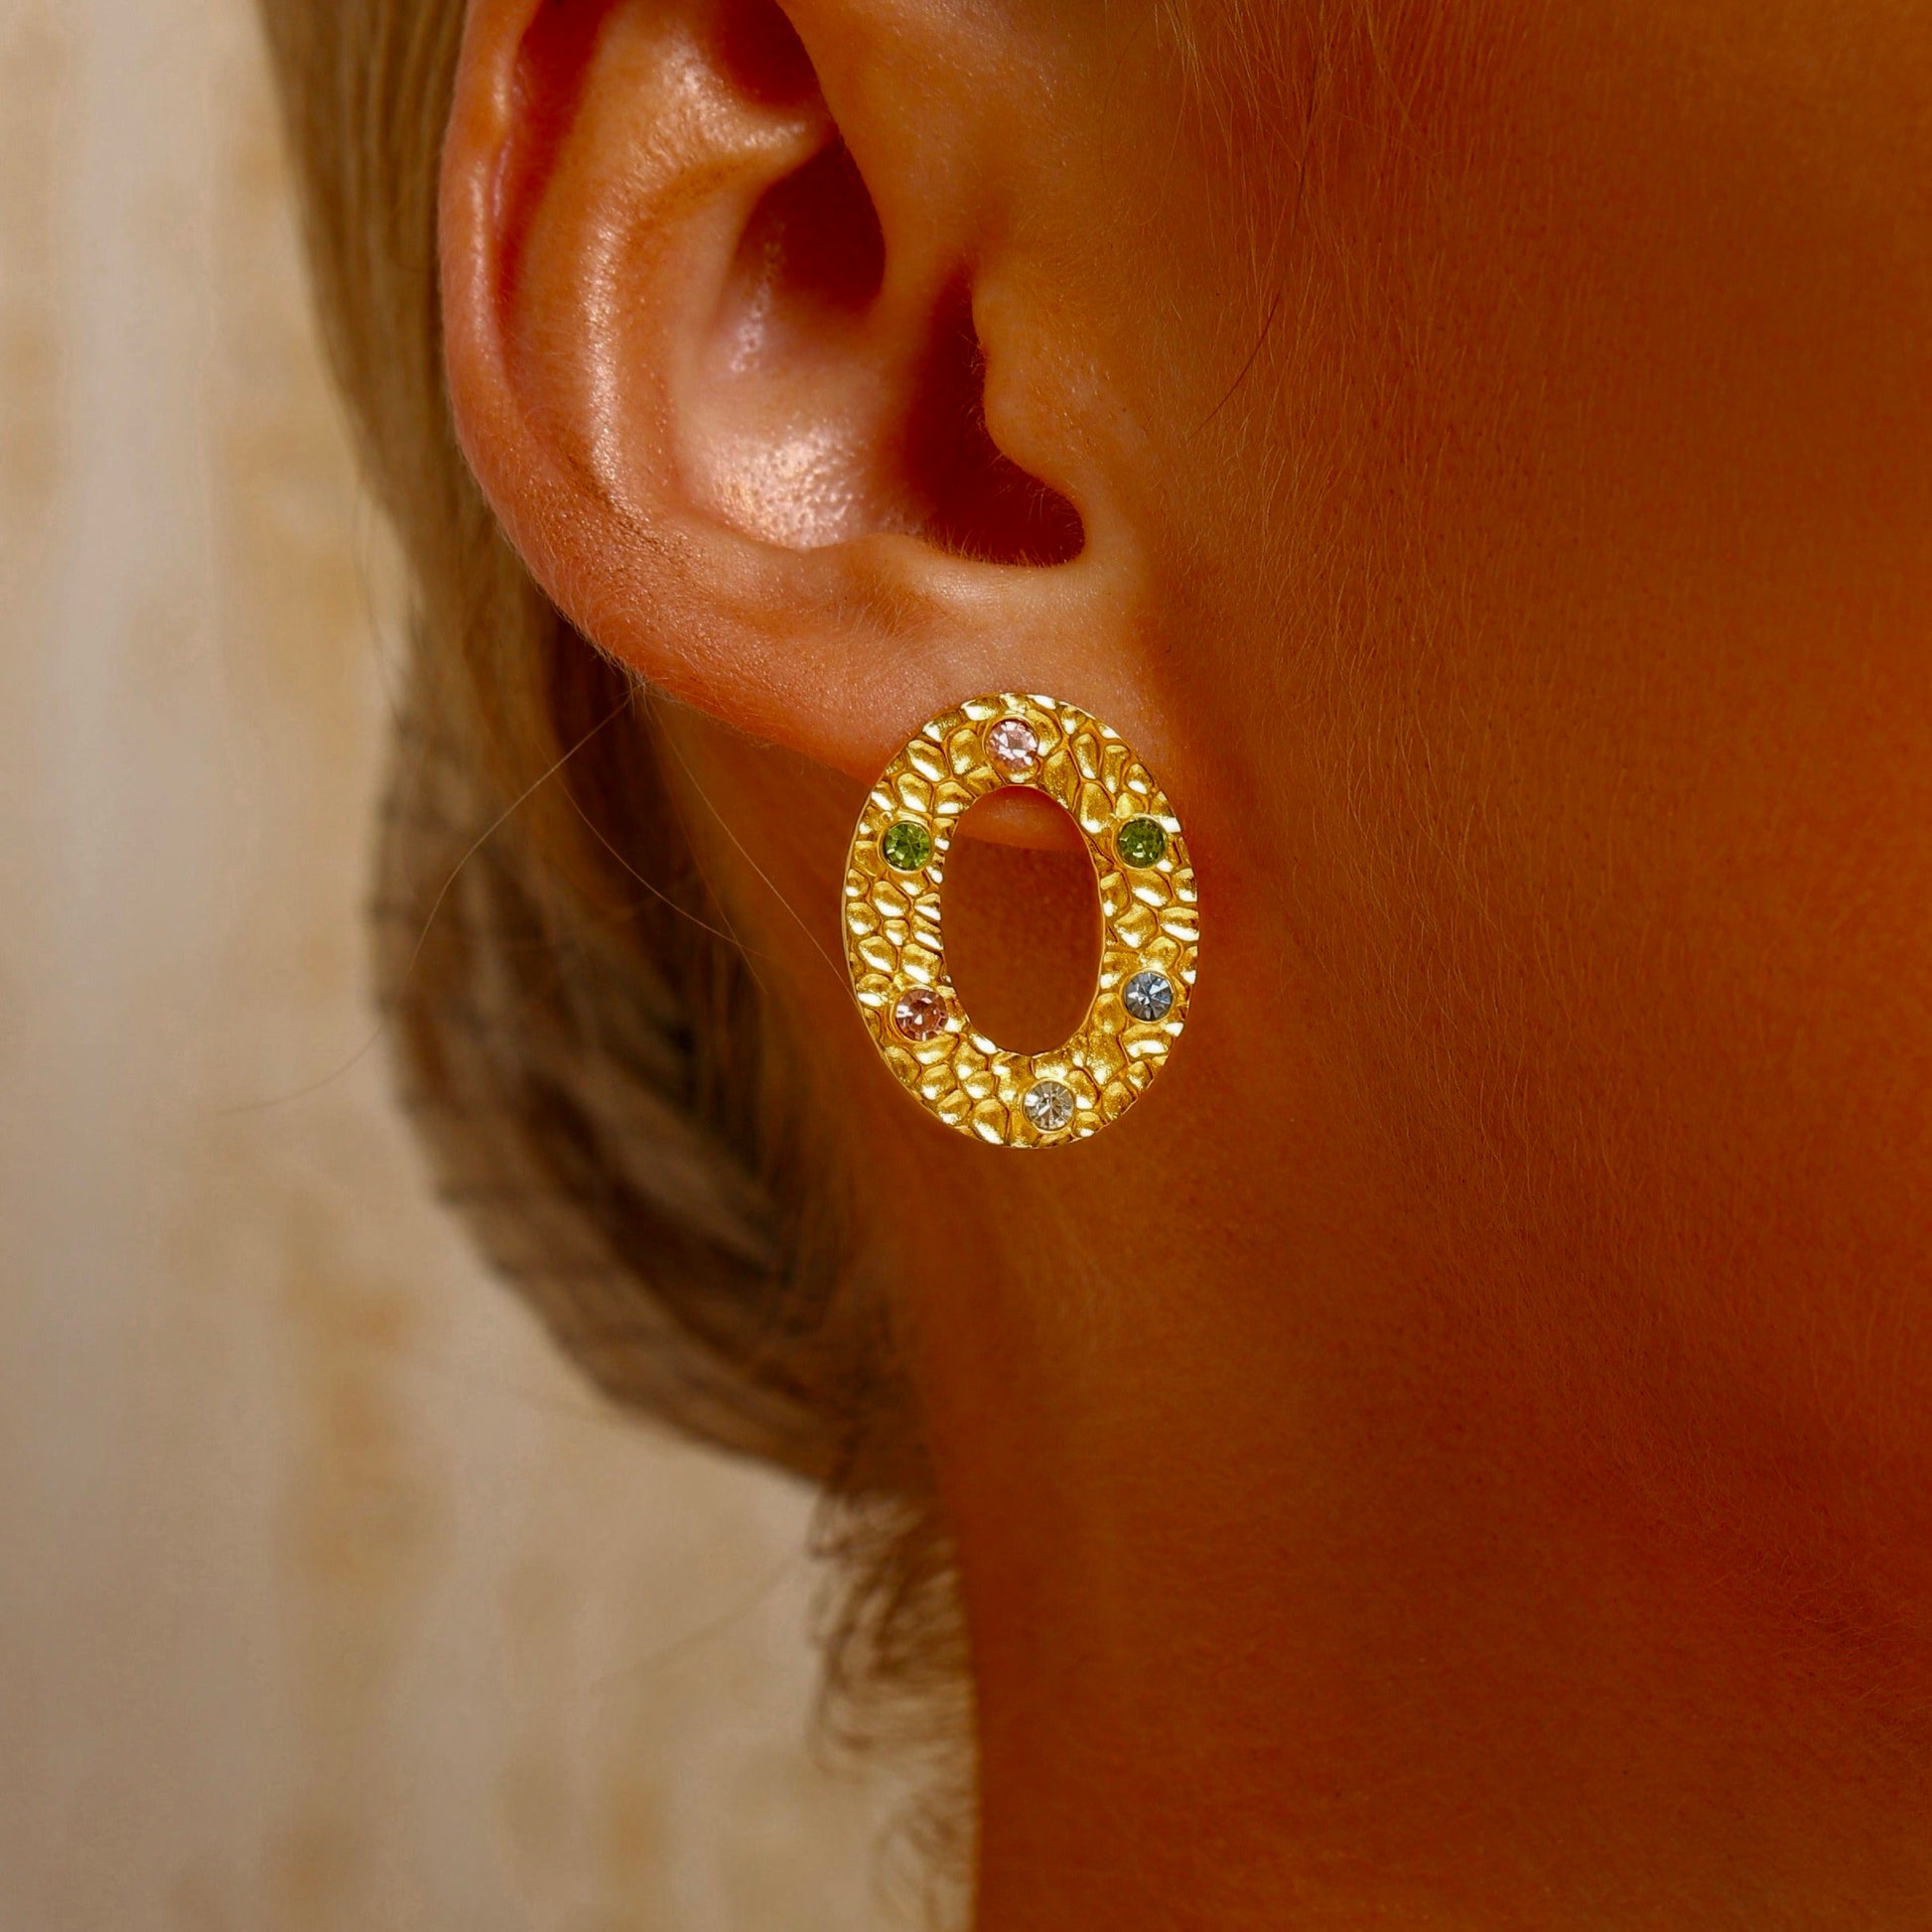 Textured Circle Stud Earrings Inlaid with Coloured CZ - 18K Gold Plated - Hypoallergenic - Earrings - ONNNIII